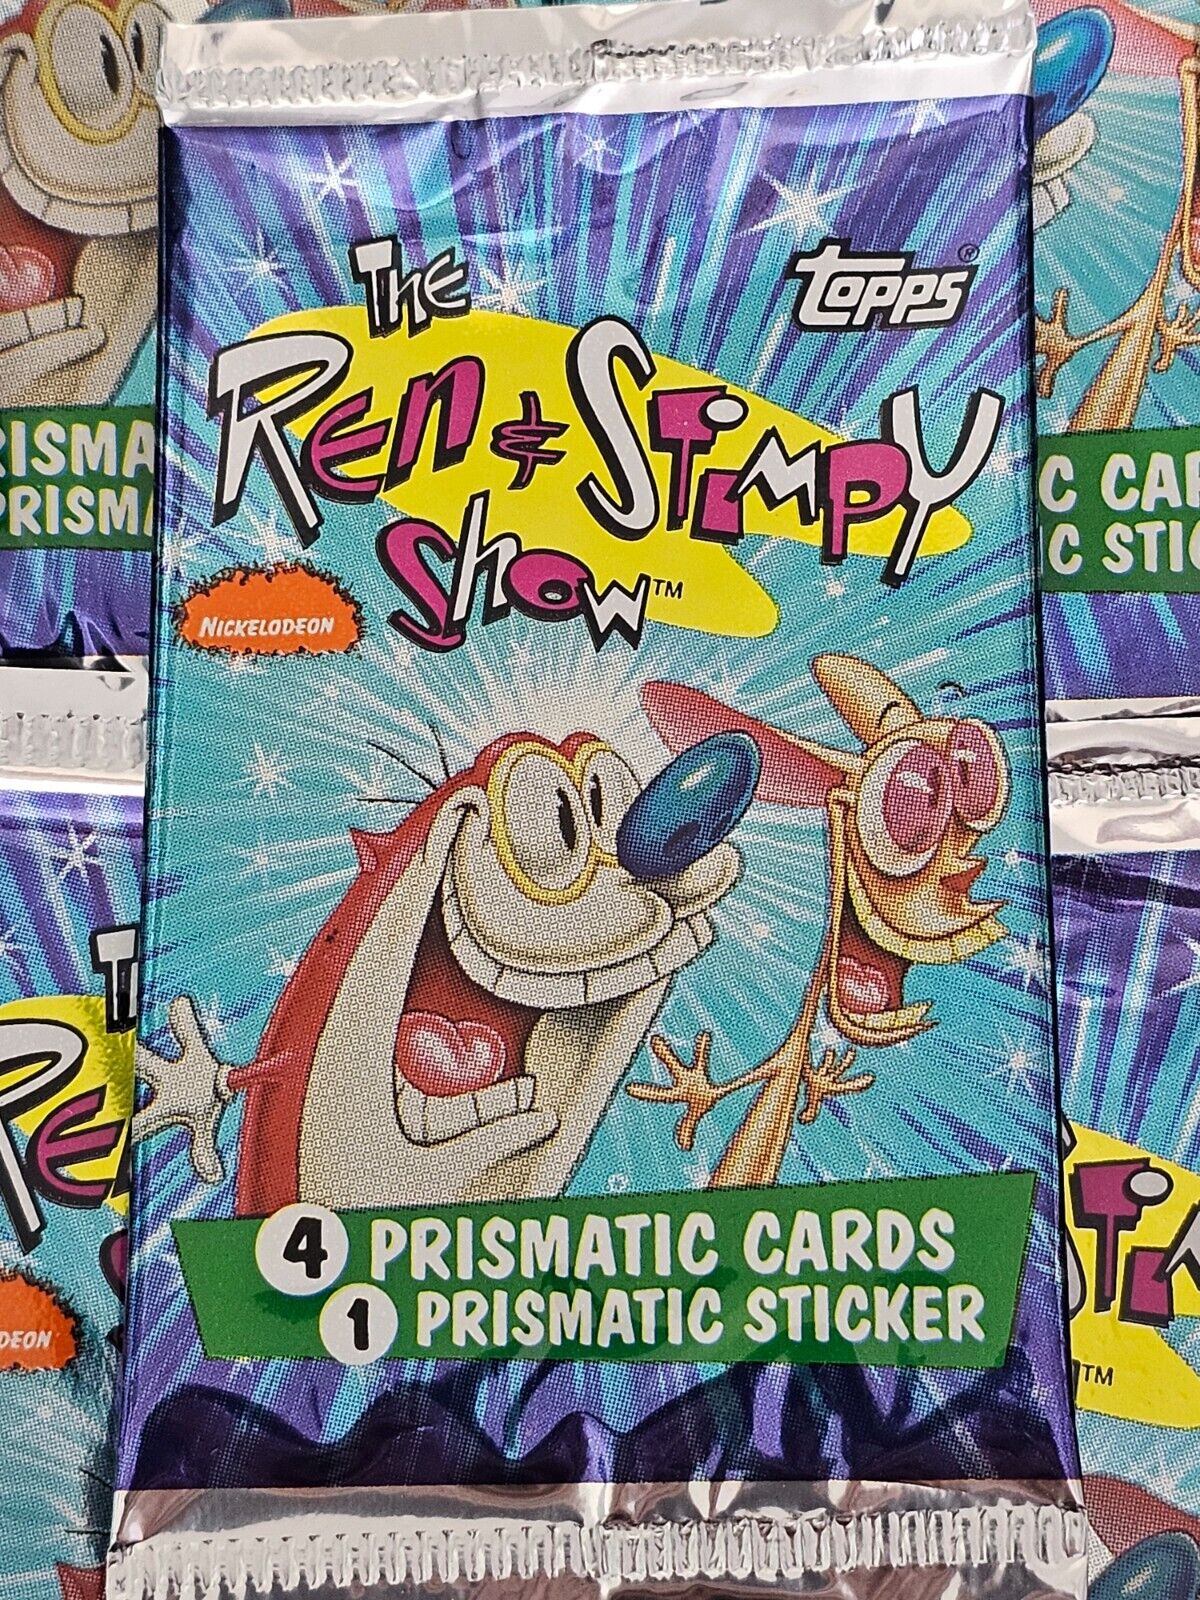 1993 Topps Ren & Stimpy Show Trading Card Pack NEW